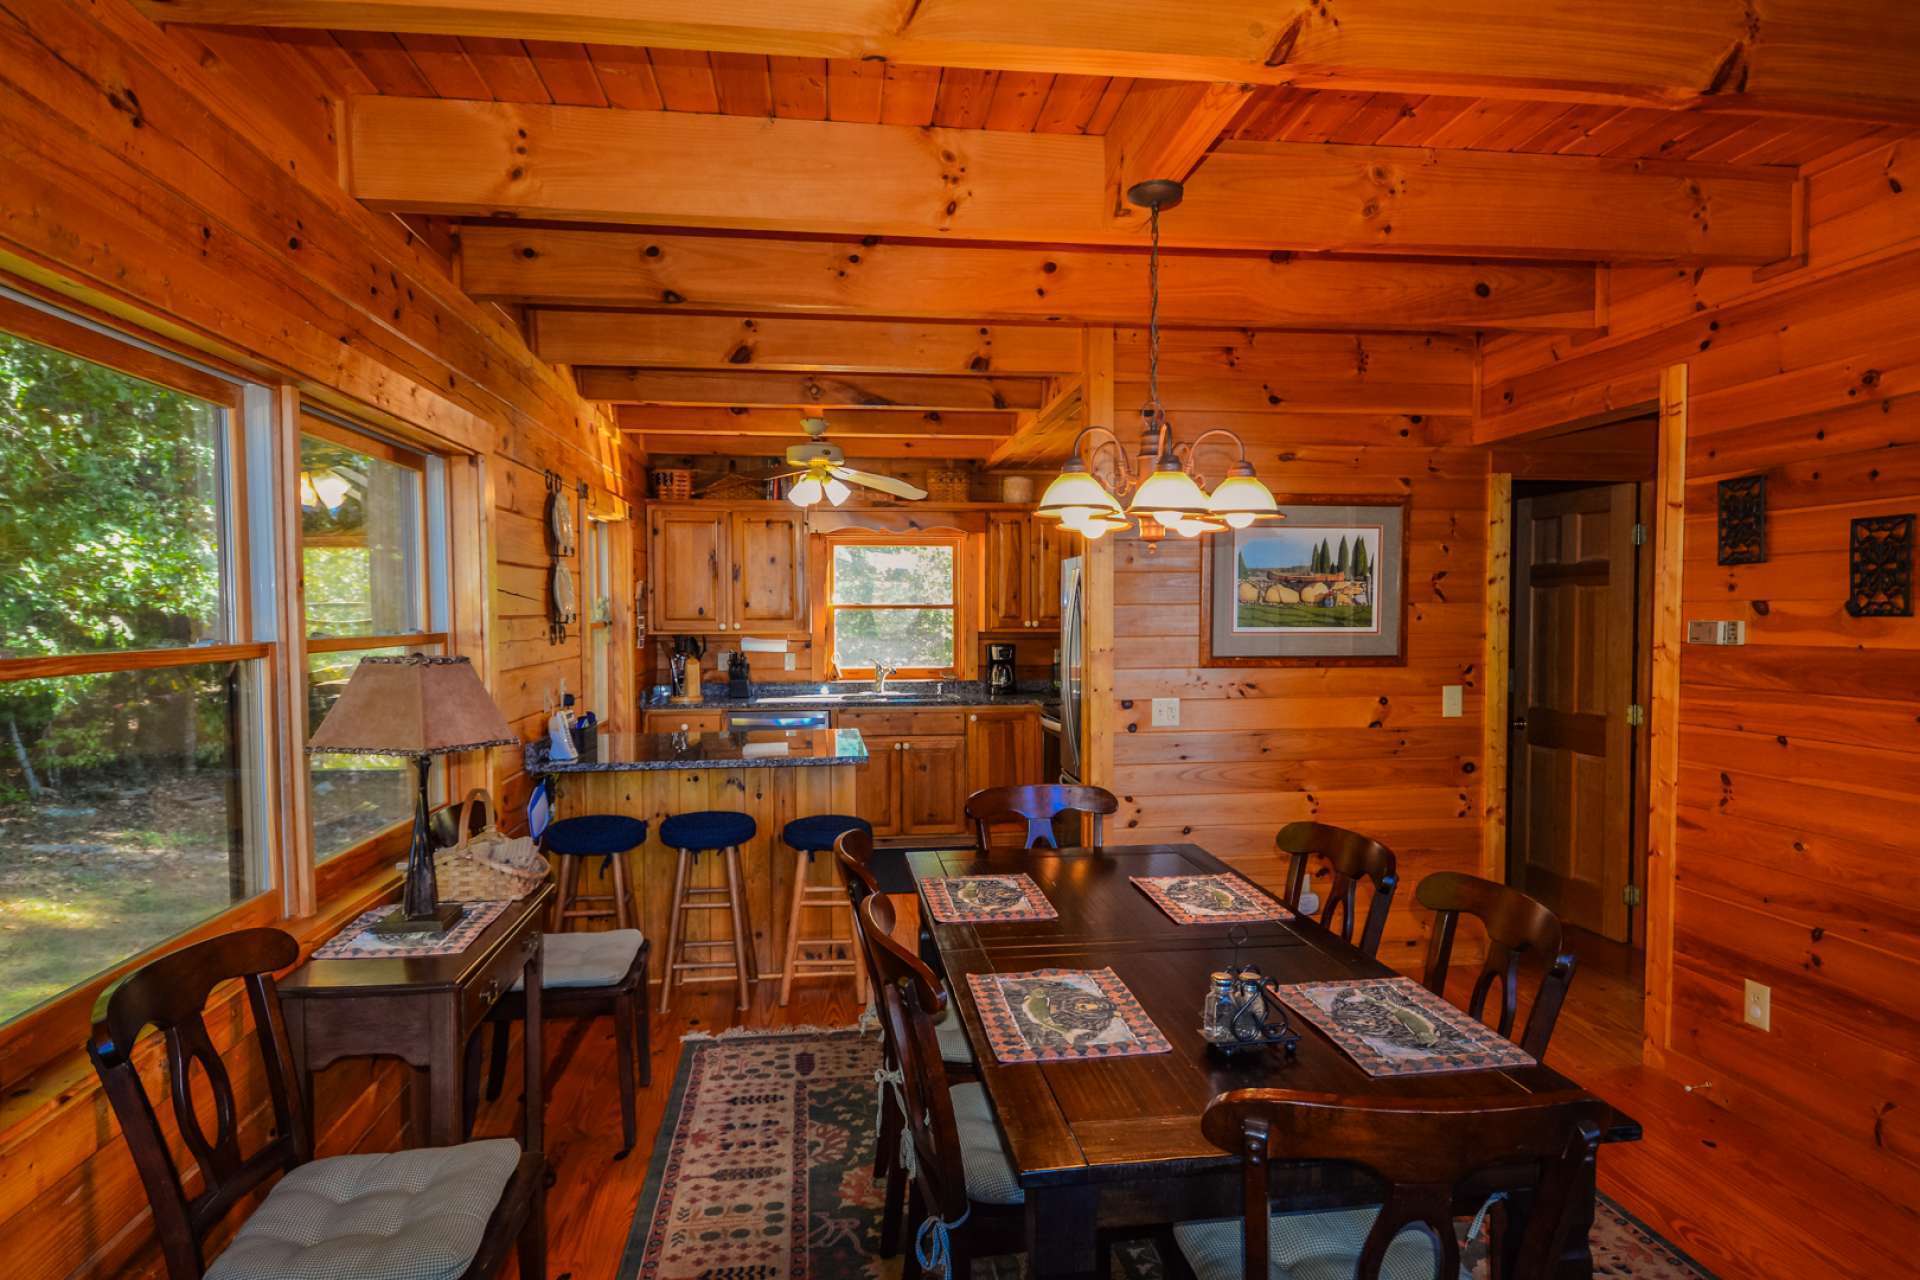 The dining area is centrally located between the kitchen and living area providing a great space for entertaining dinner guests and still cozy for an intimate dinner with that special someone.